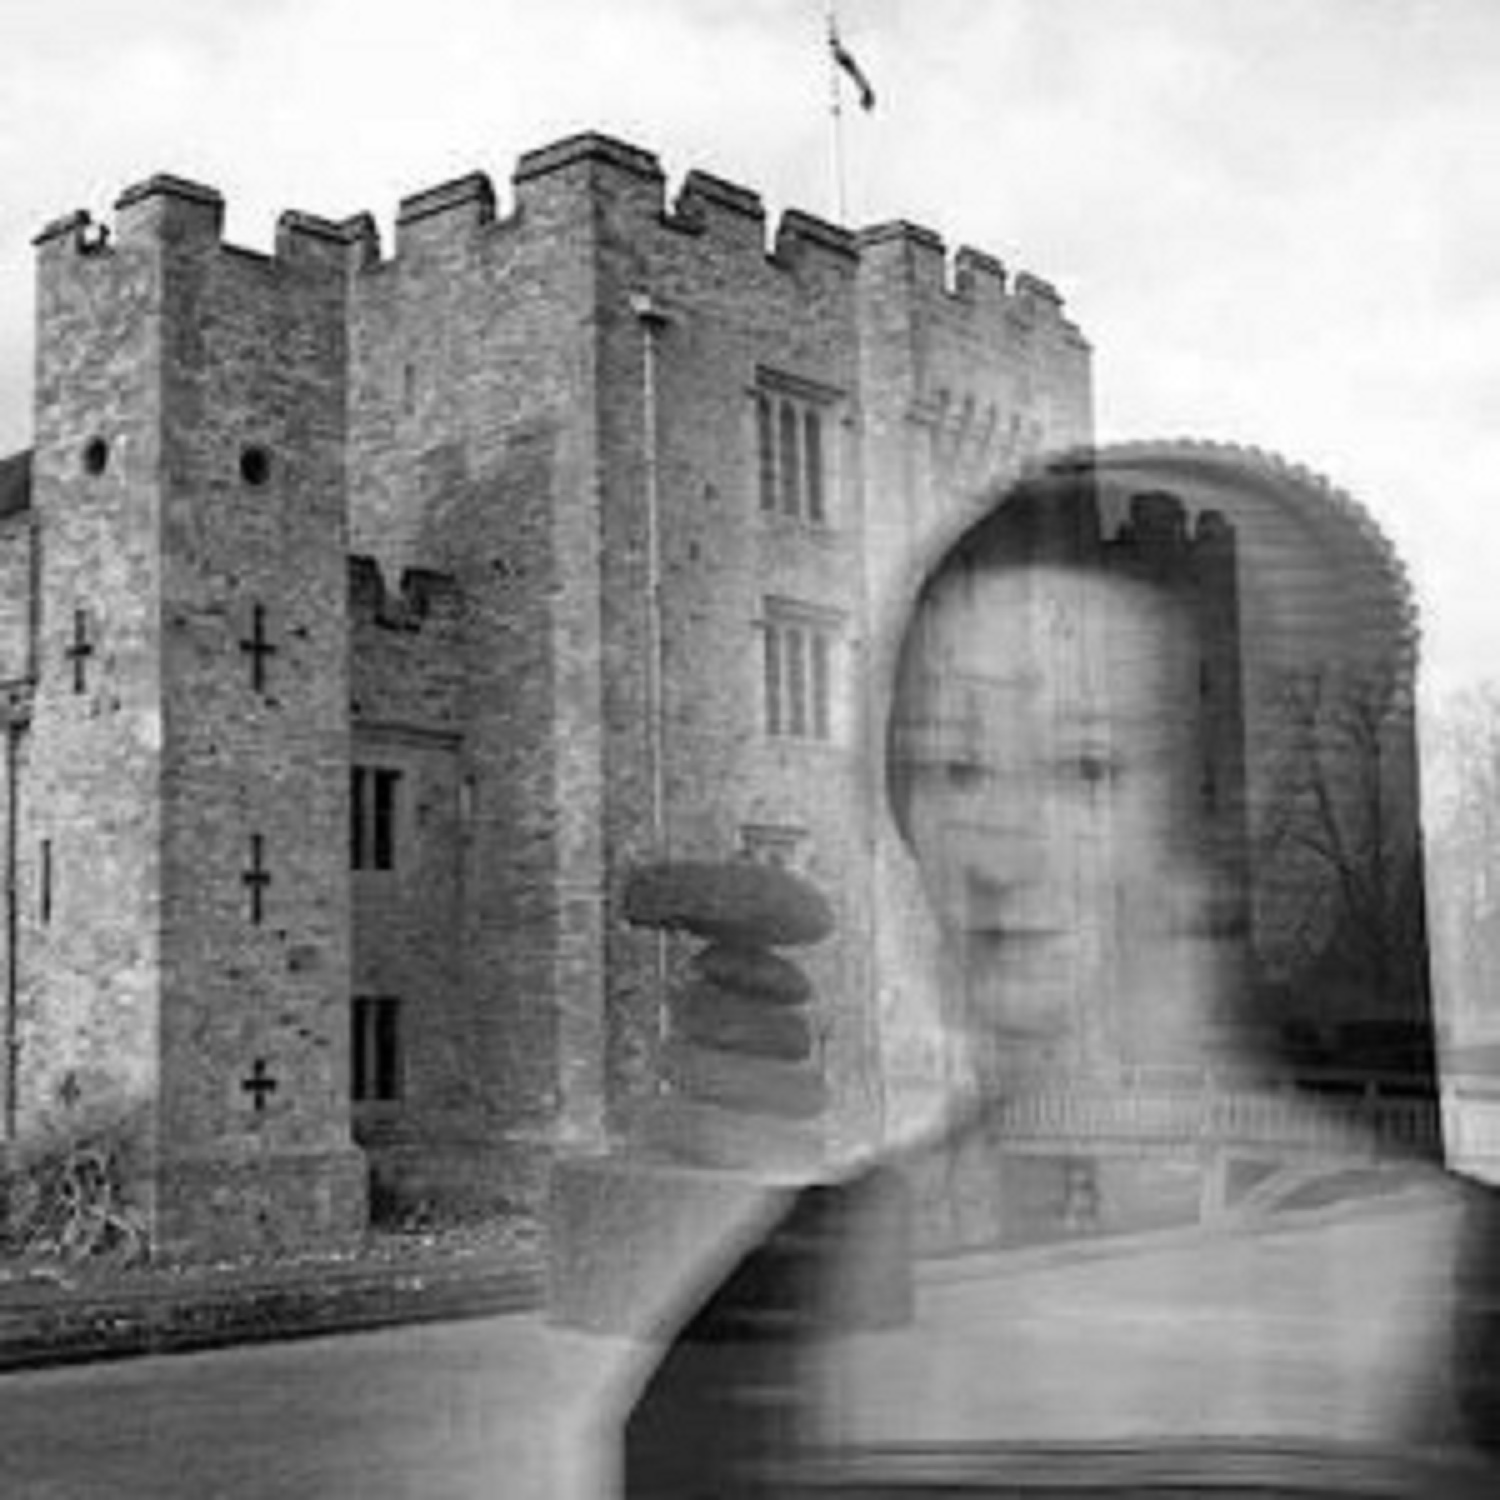 THE GHOST OF QUEEN ANNE BOLEYN AT THE TOWER OF LONDON